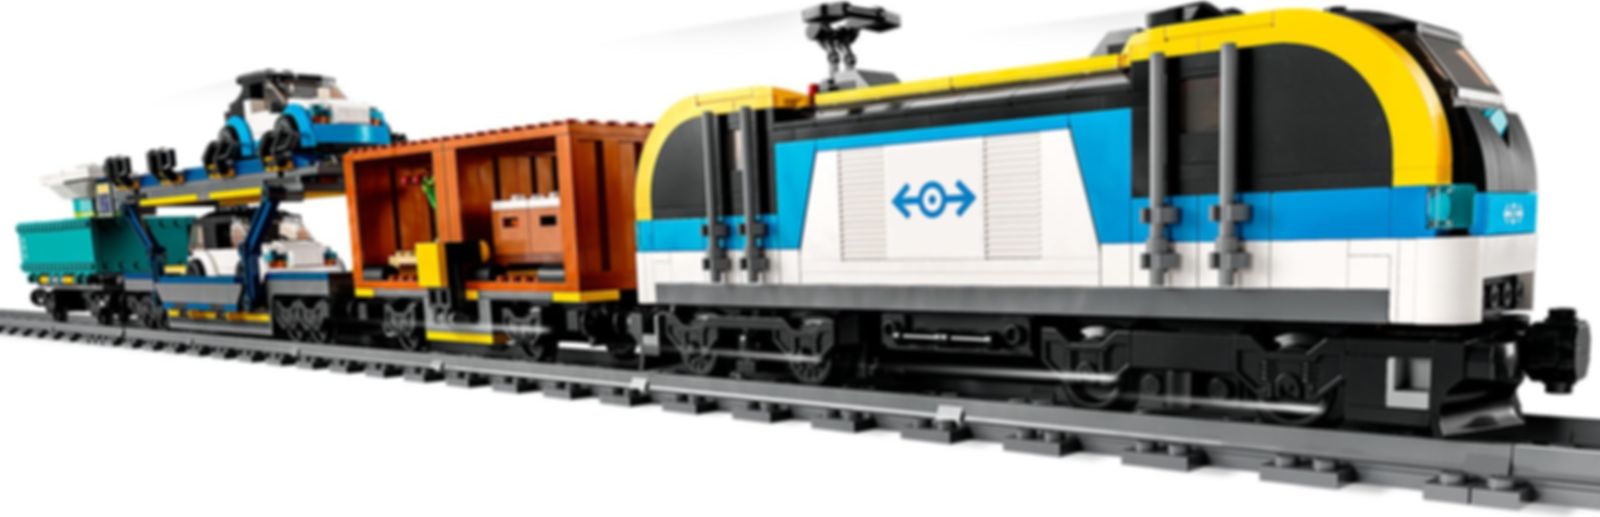 LEGO® City Freight Train components